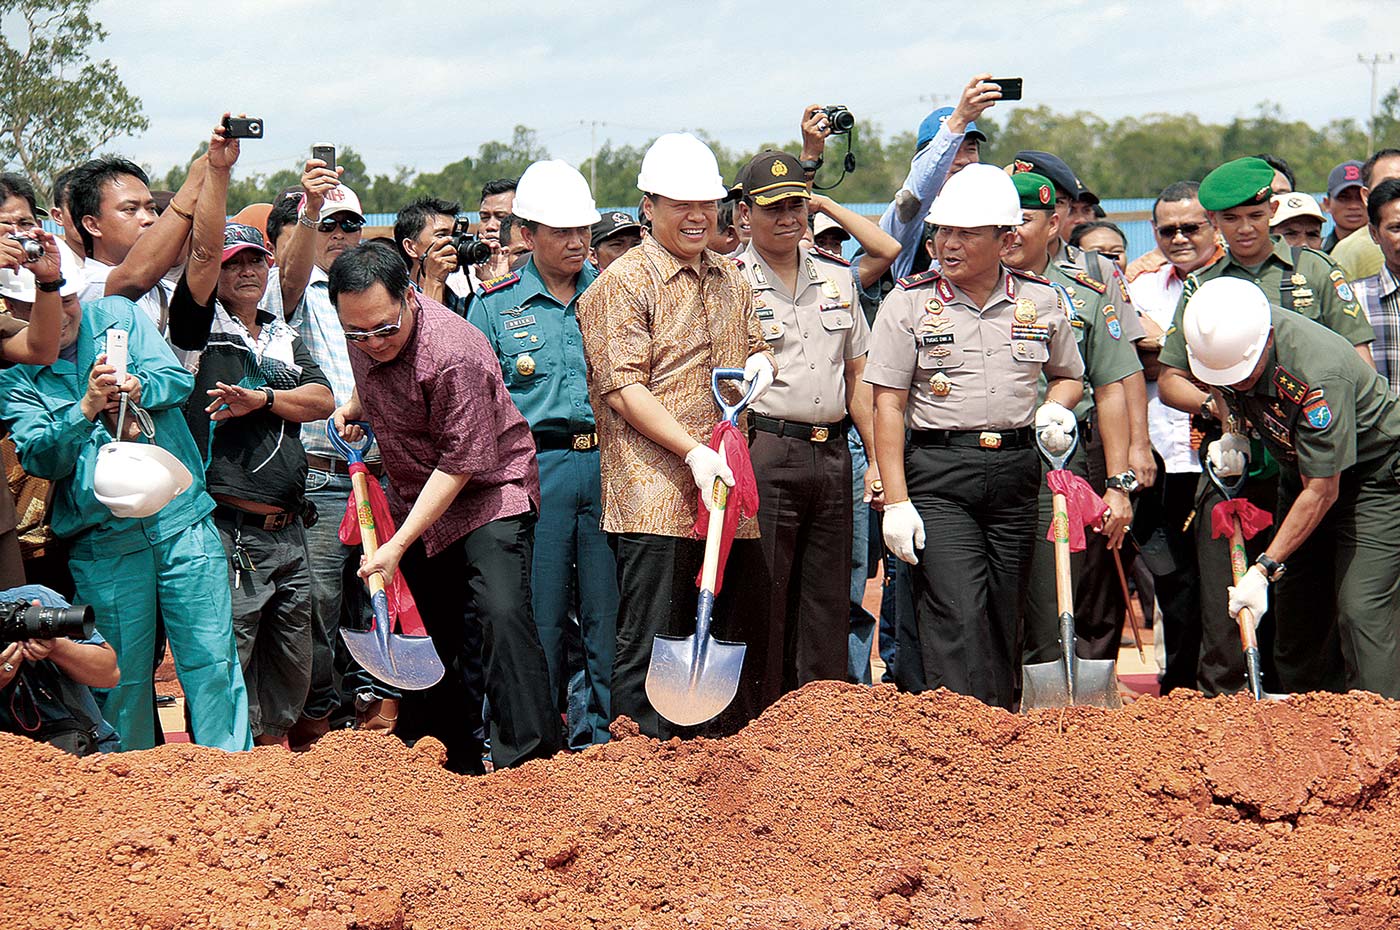 In 2014, the foundation was laid for the new Alumina plant in Indonesia